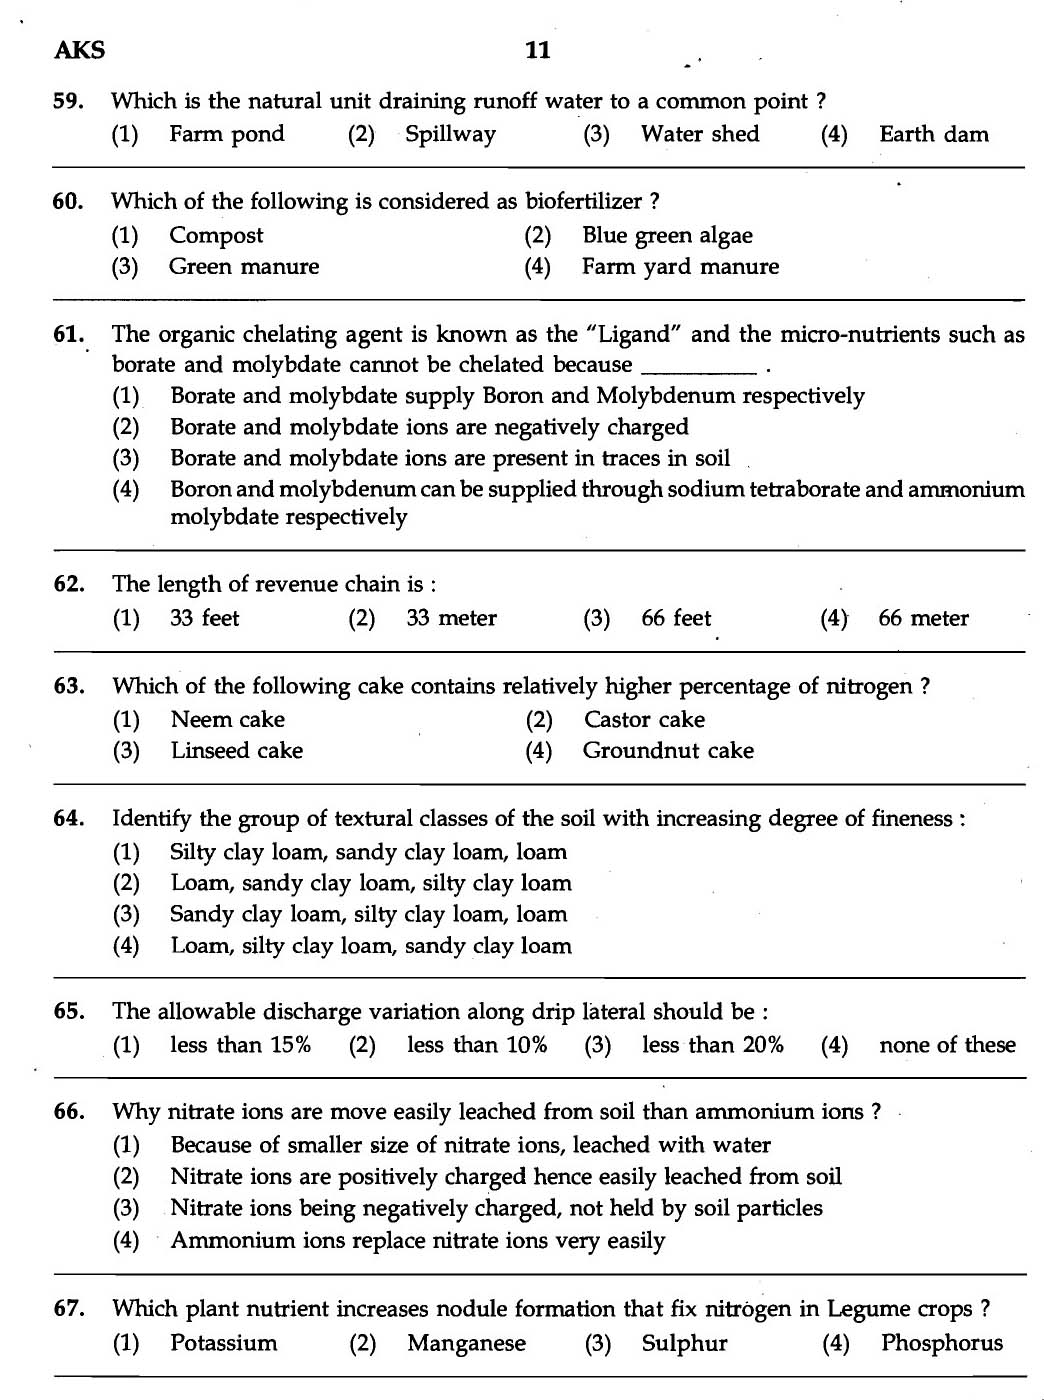 MPSC Agricultural Services Exam 2007 Question Paper Agricultural Science 9